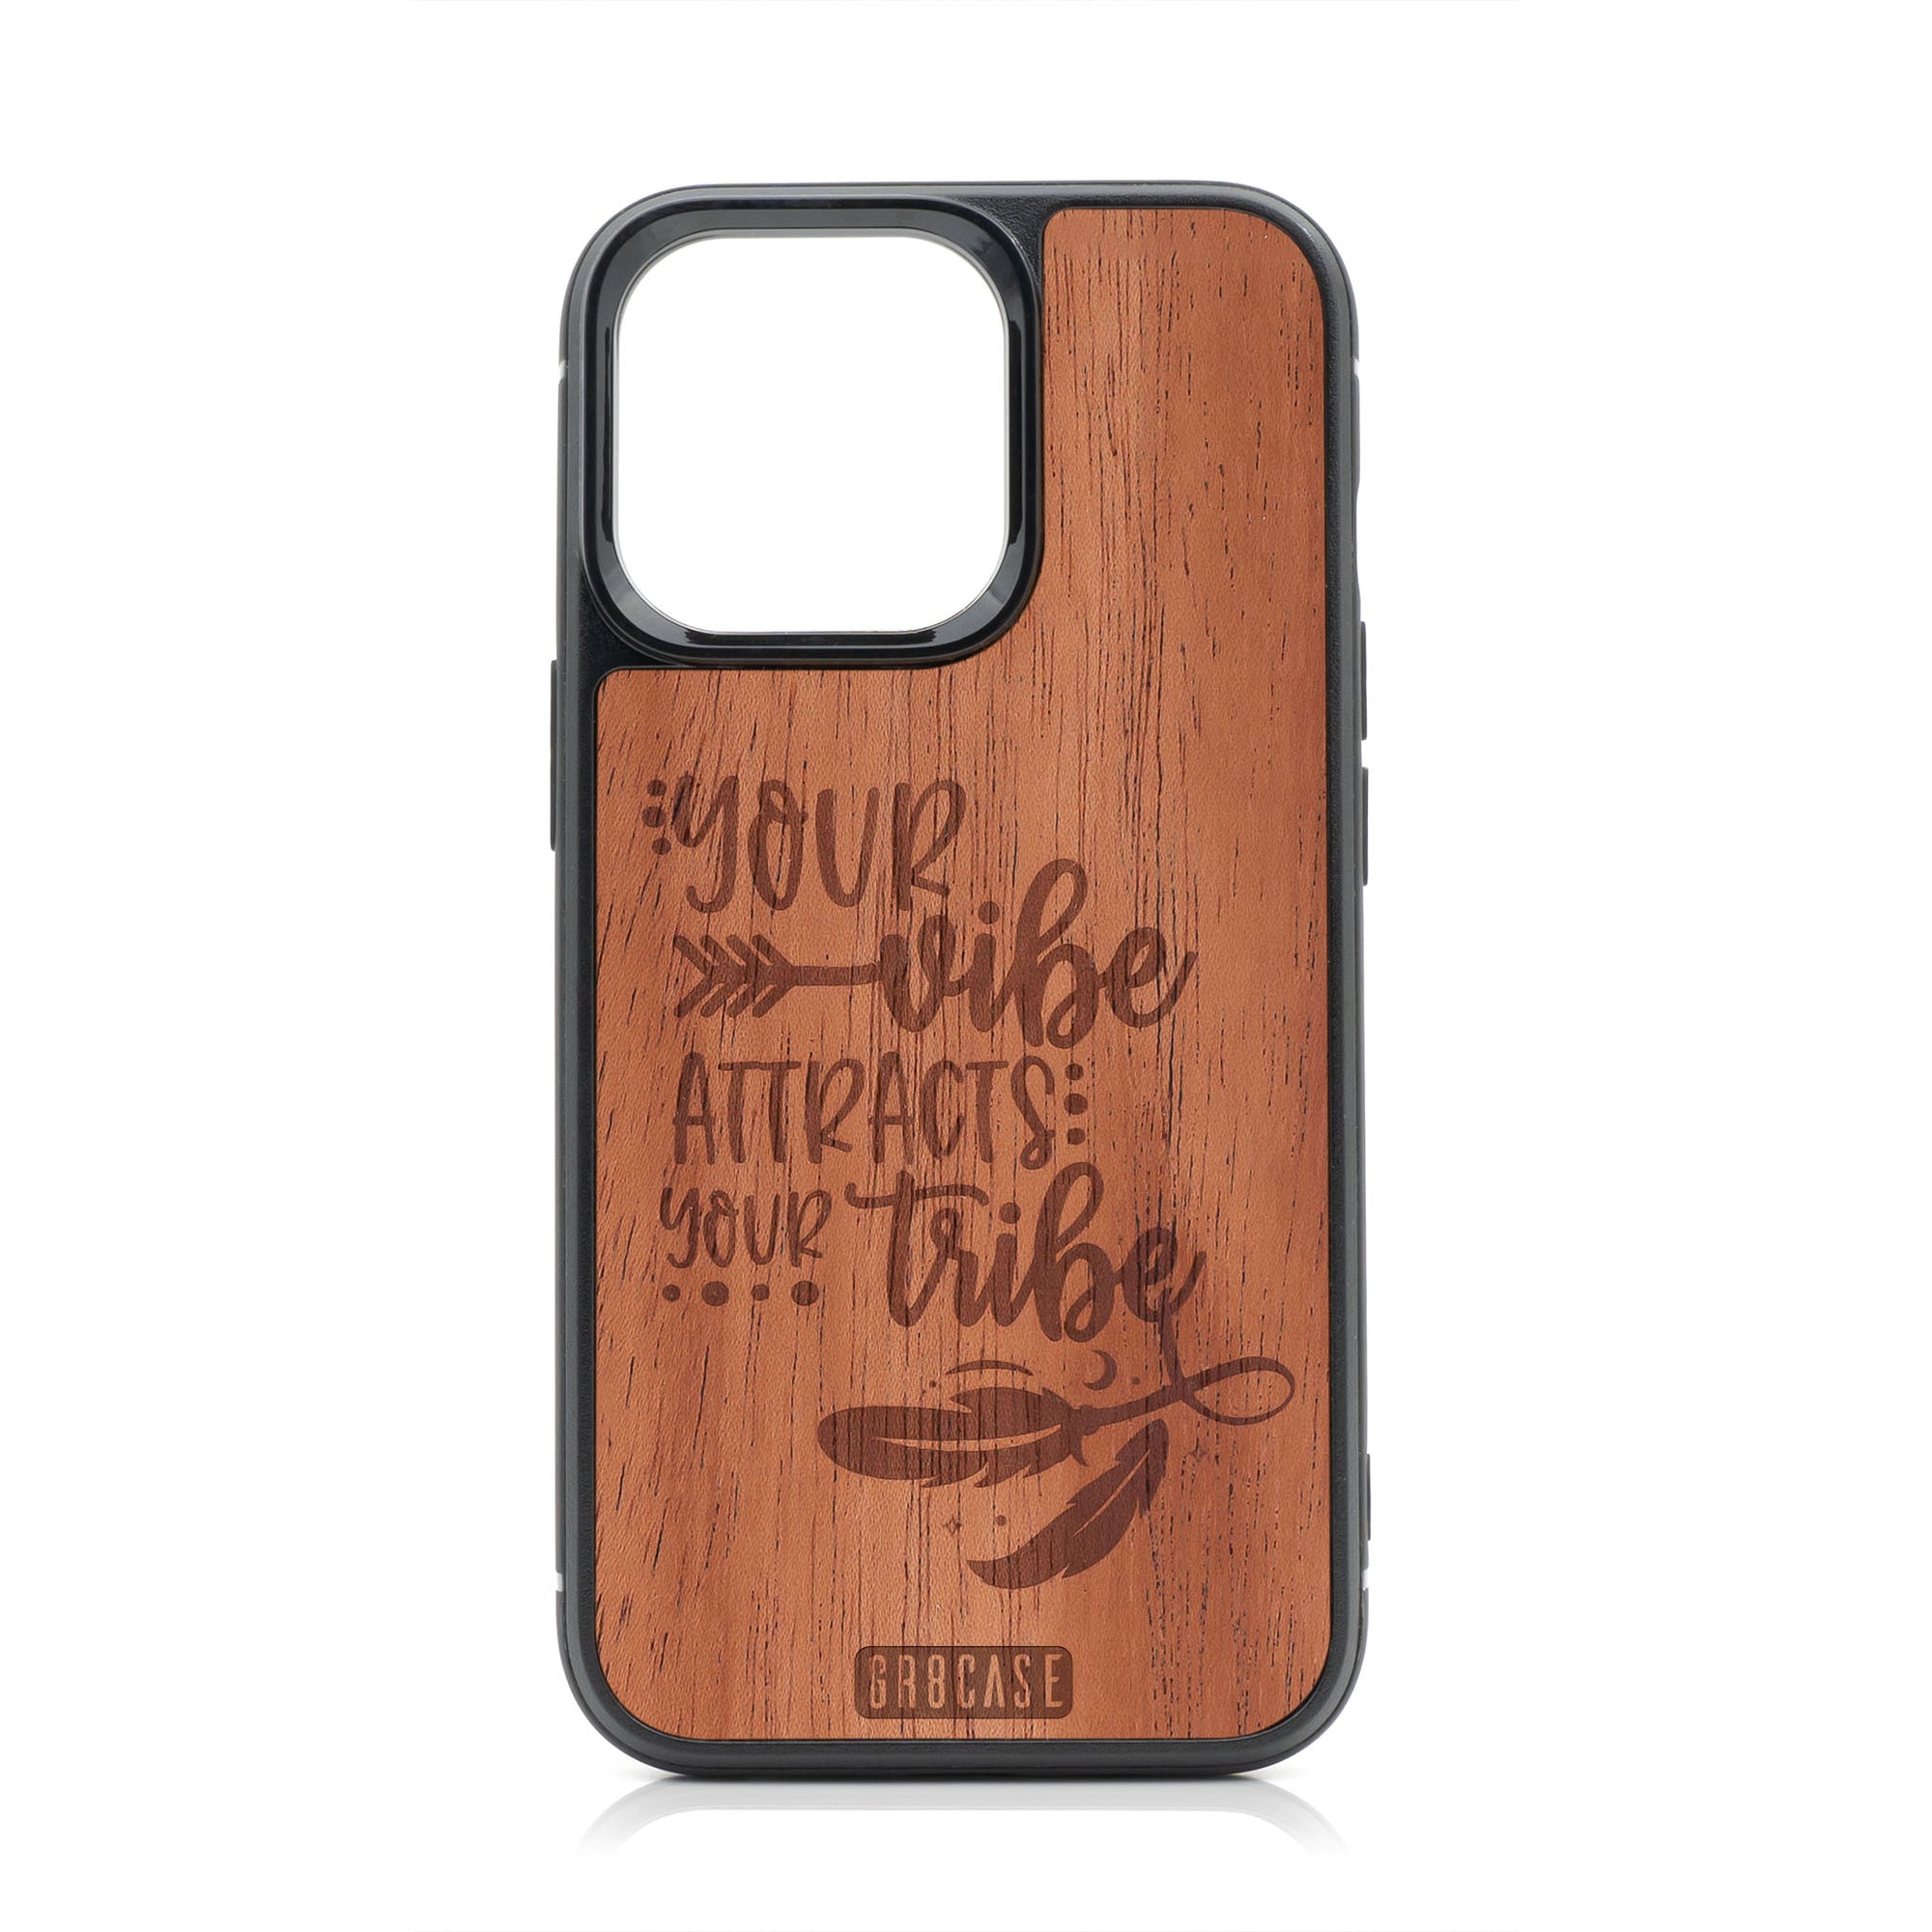 Your Vibe Attracts Your Tribe Design Wood Case For iPhone 13 Pro